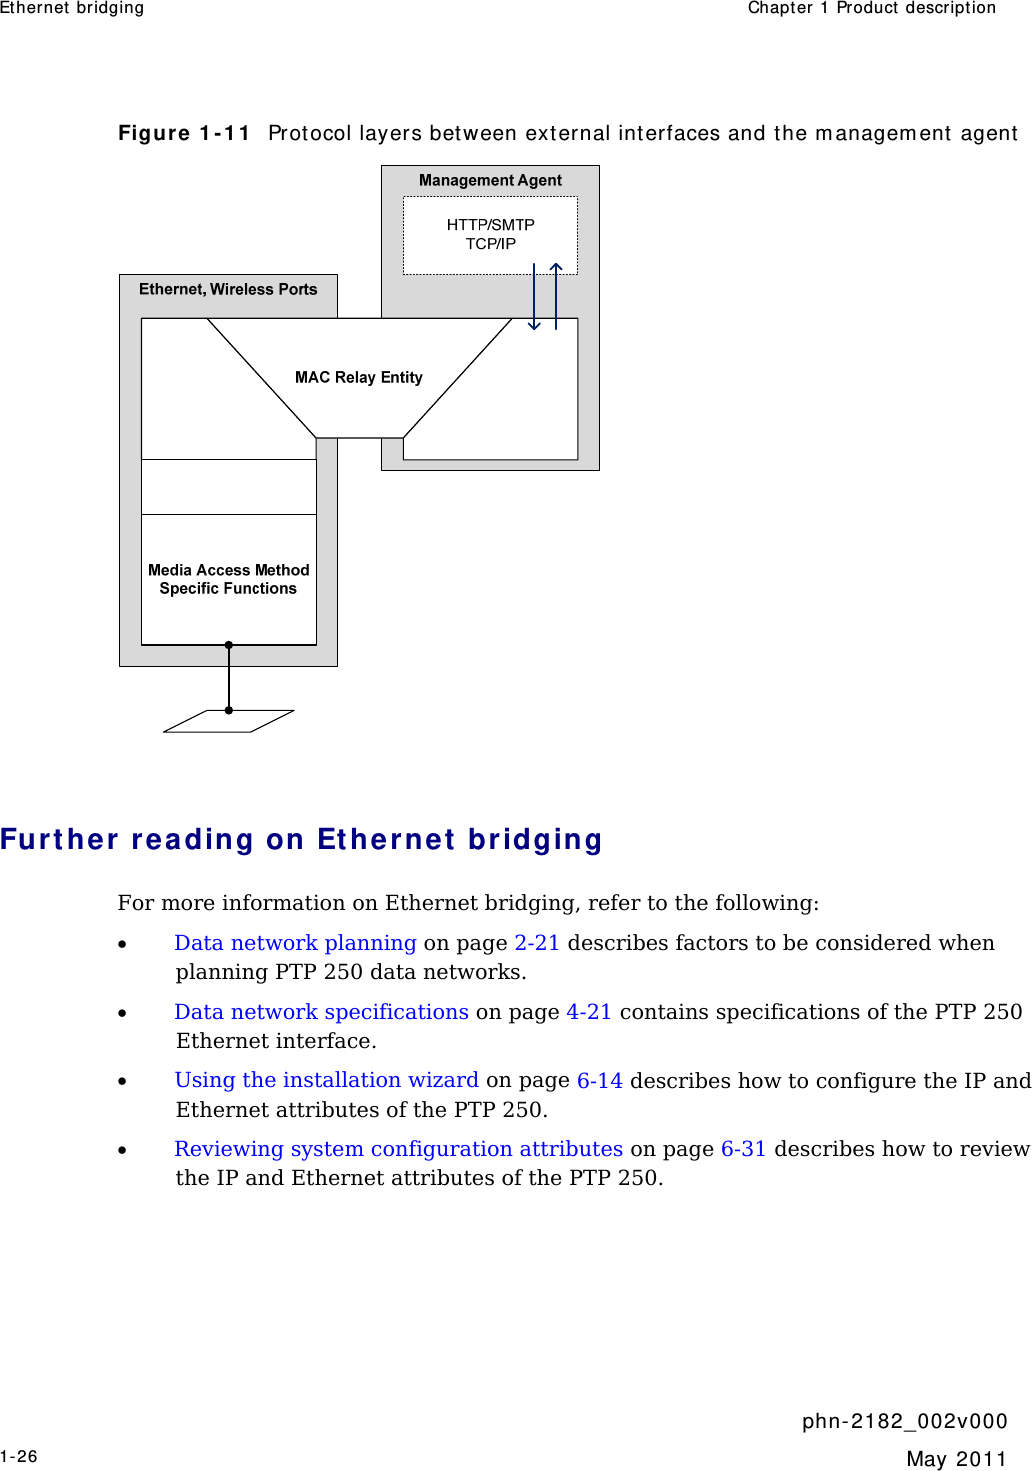 Ether net  bridging  Chapt er  1 Product descr ipt ion     phn- 2 182_002v 000 1-26  May 2011  Figure 1 - 1 1   Protocol layers between ext ernal int erfaces and t he m anagem ent agent   Furt her rea ding on Et hernet  br idging For more information on Ethernet bridging, refer to the following: • Data network planning on page 2-21 describes factors to be considered when planning PTP 250 data networks. • Data network specifications on page 4-21 contains specifications of the PTP 250 Ethernet interface. • Using the installation wizard on page 6-14 describes how to configure the IP and Ethernet attributes of the PTP 250. • Reviewing system configuration attributes on page 6-31 describes how to review the IP and Ethernet attributes of the PTP 250.   